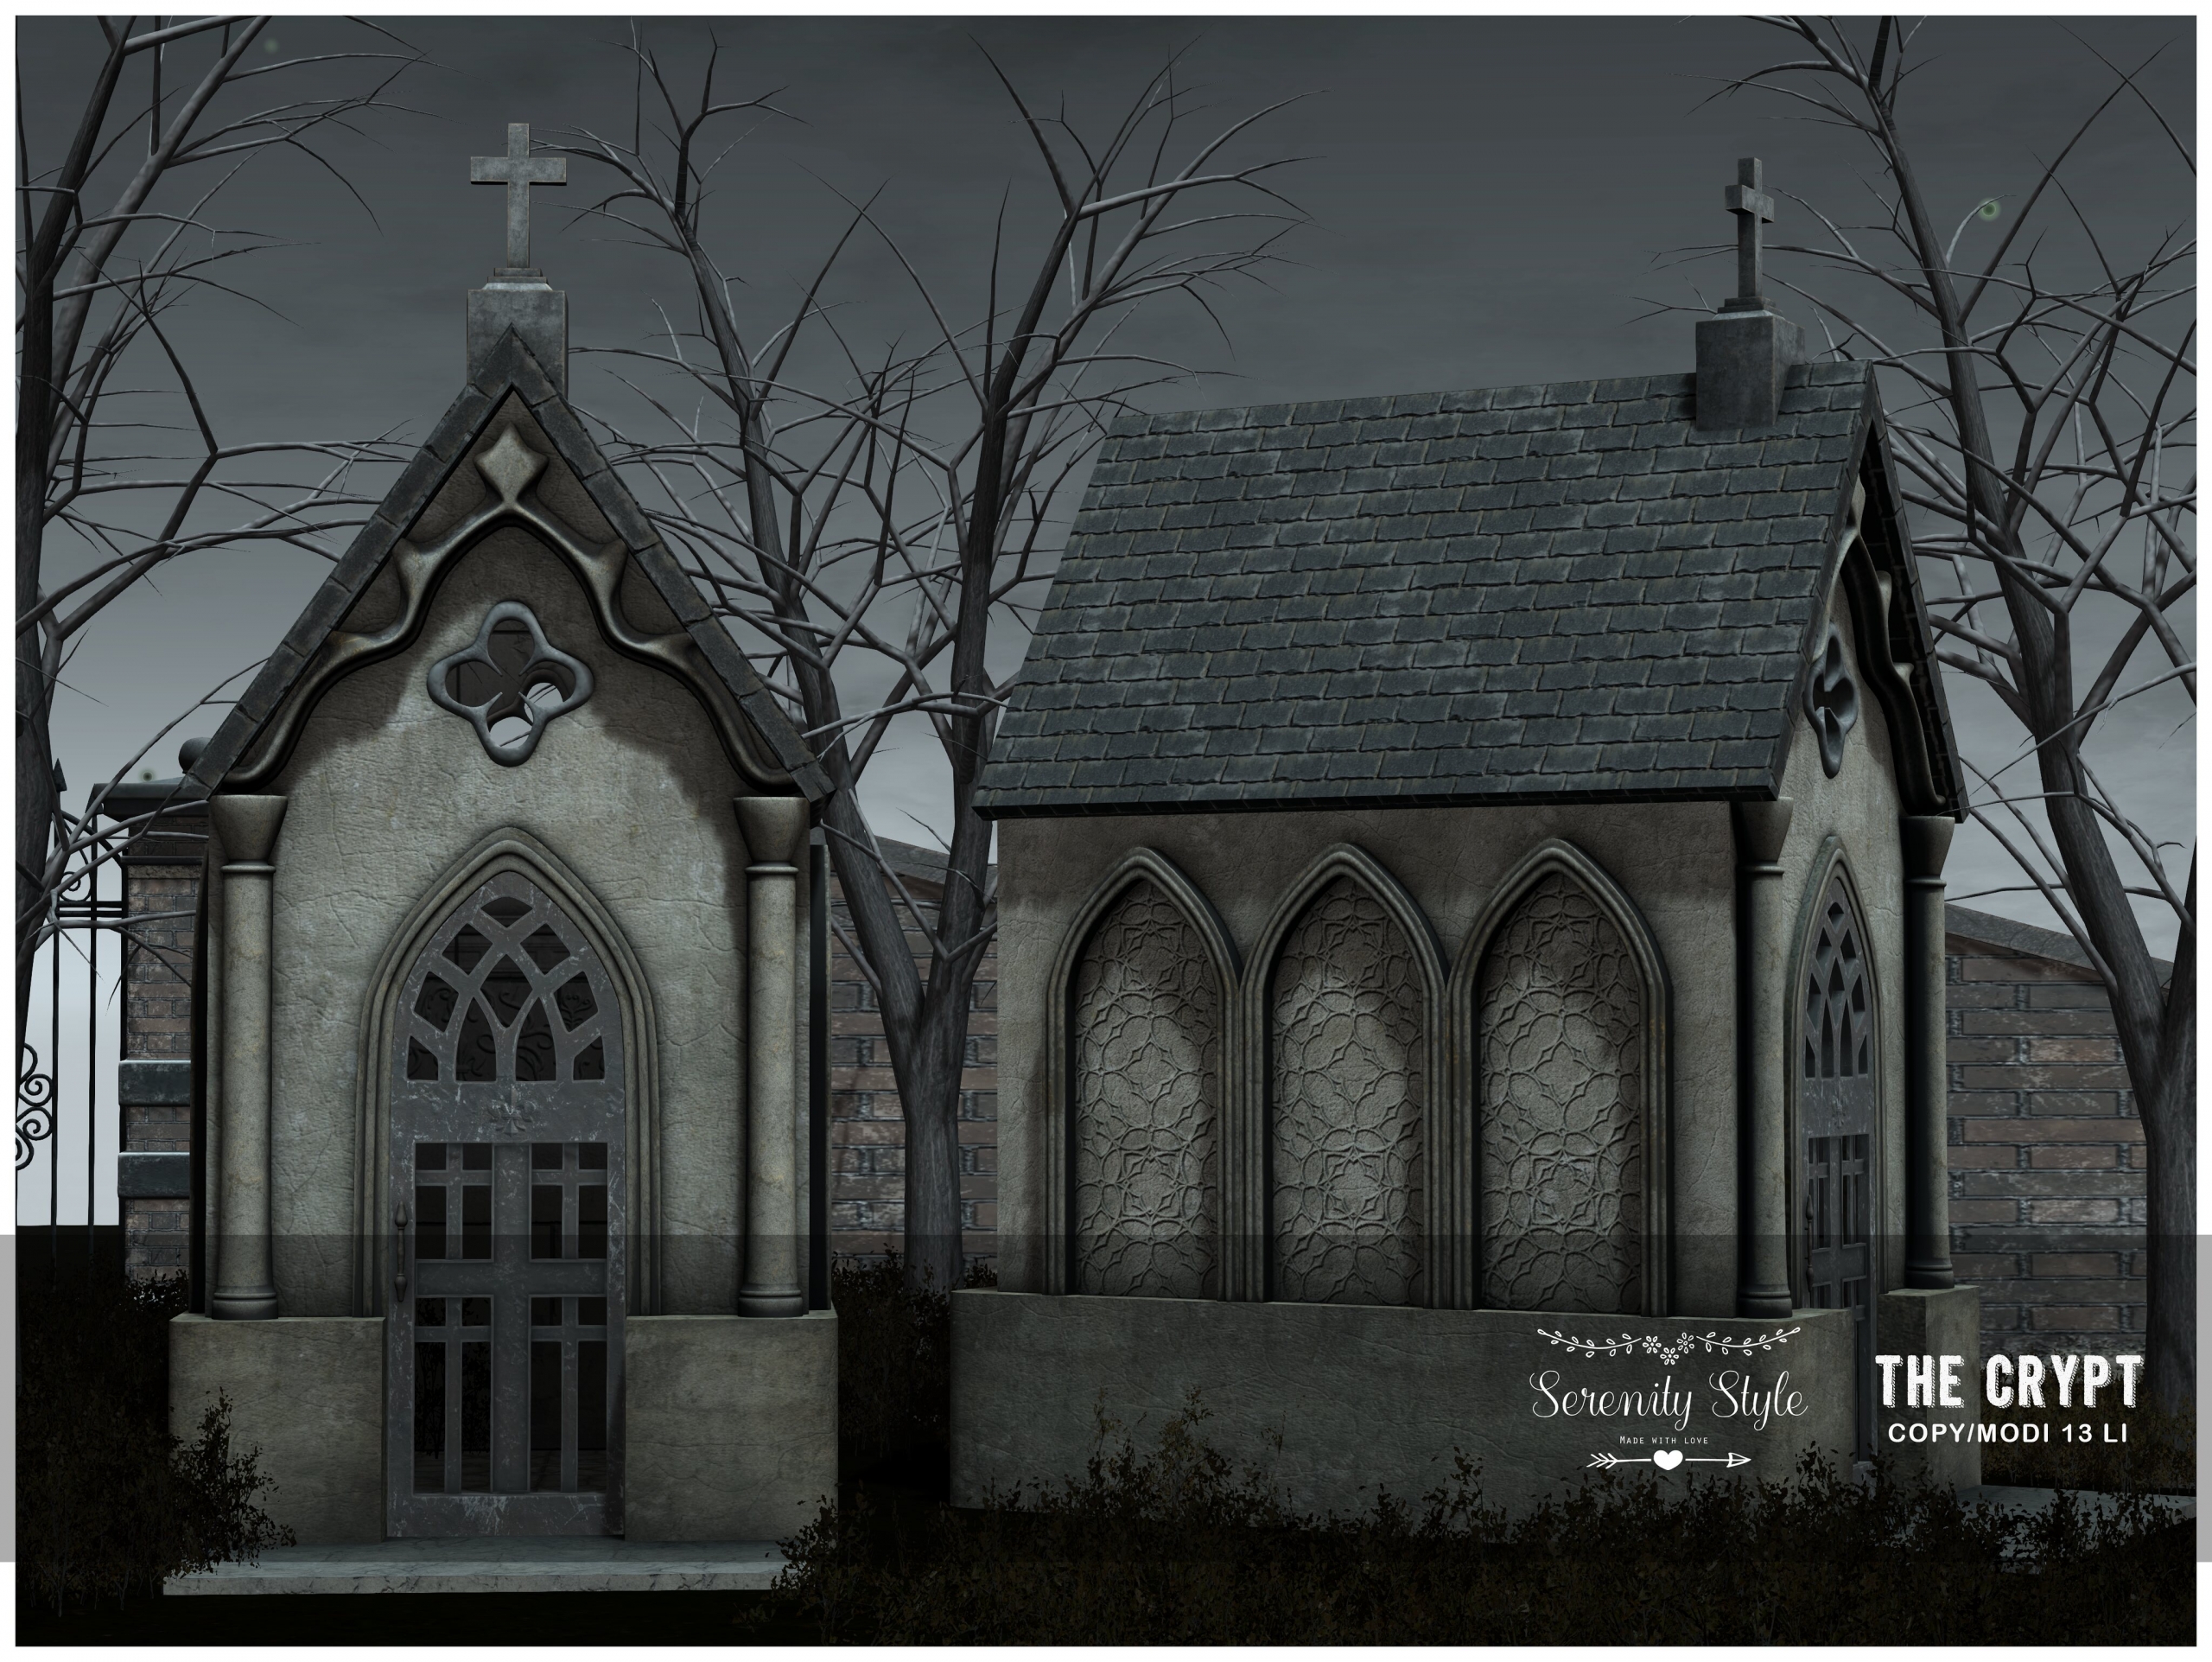 Serenity Style – The Crypt